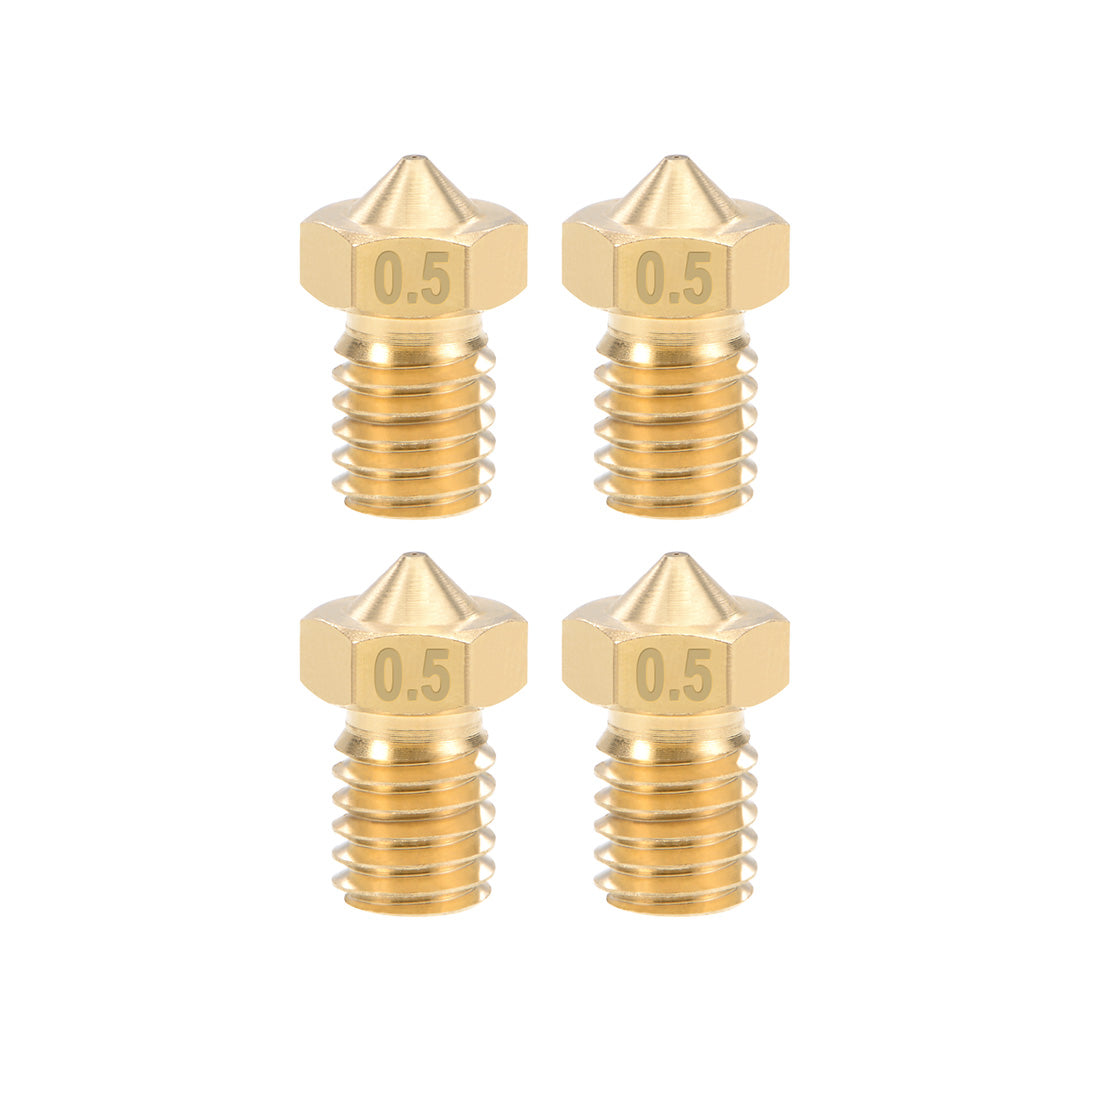 uxcell Uxcell 0.5mm 3D Printer Nozzle Head M6 Thread Replacement for V5 V6 3mm Extruder Print, Brass 4pcs